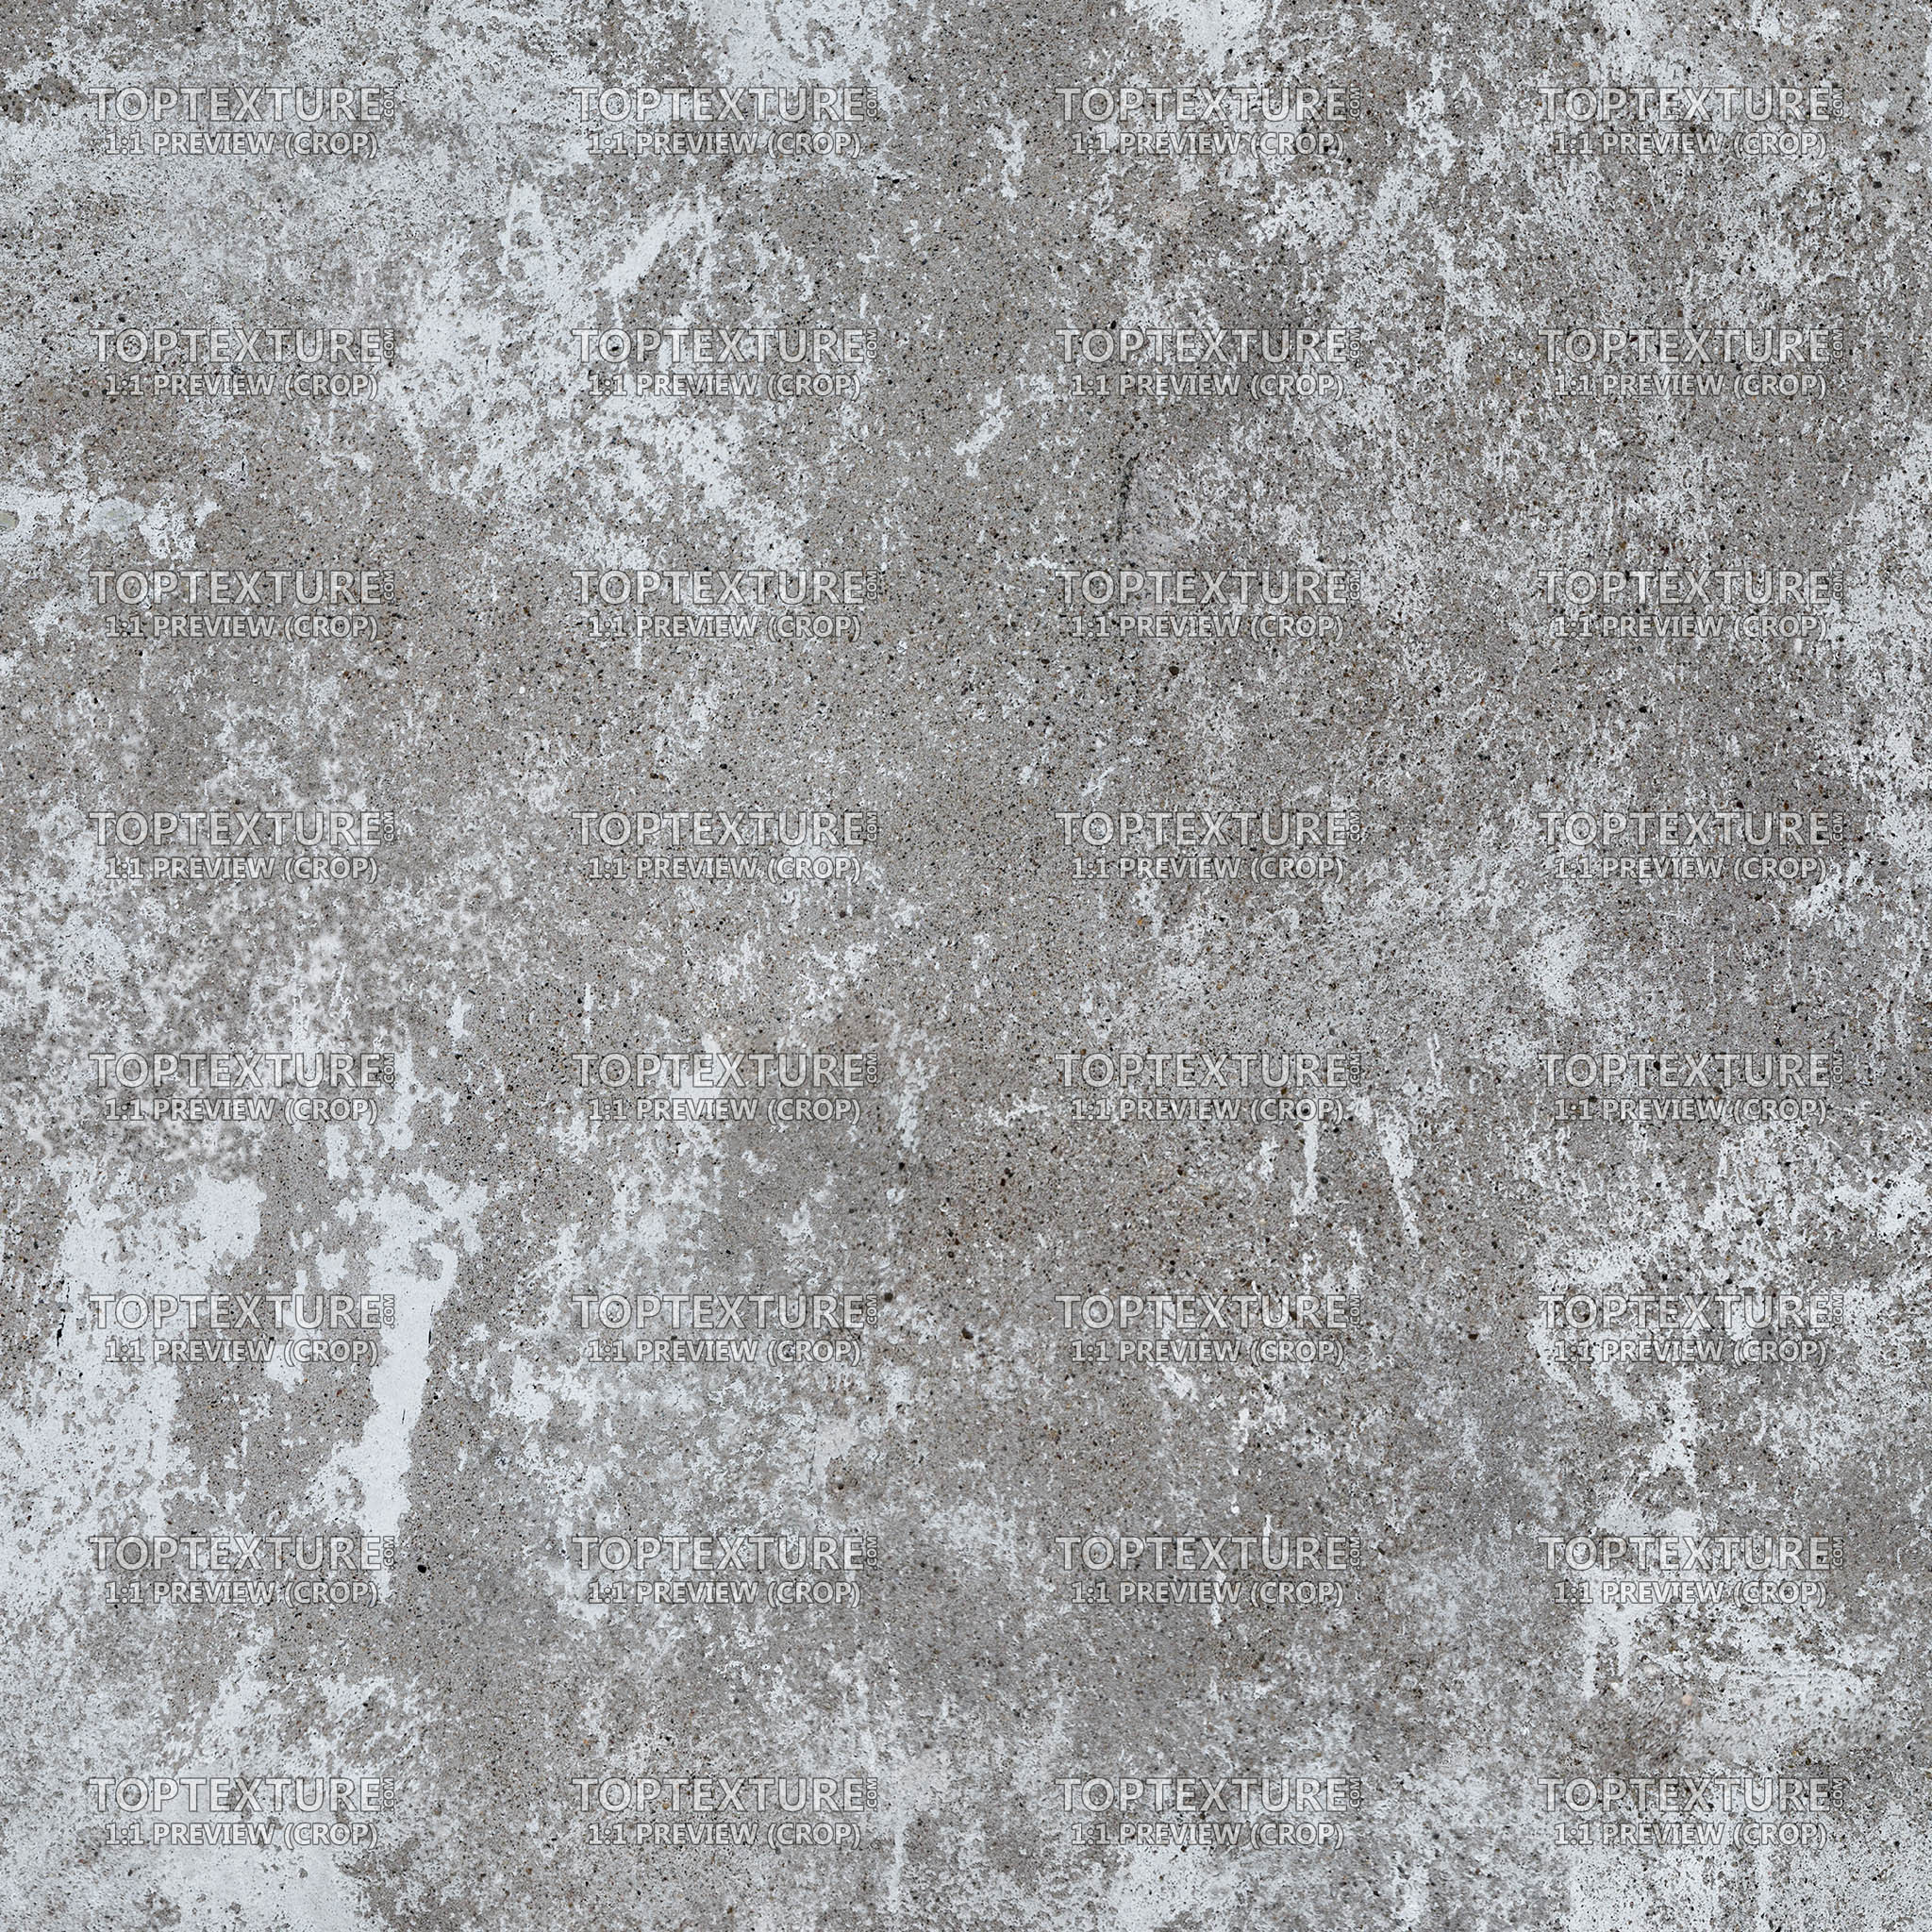 Concrete Wall with Random White Paint Spots - 100% zoom